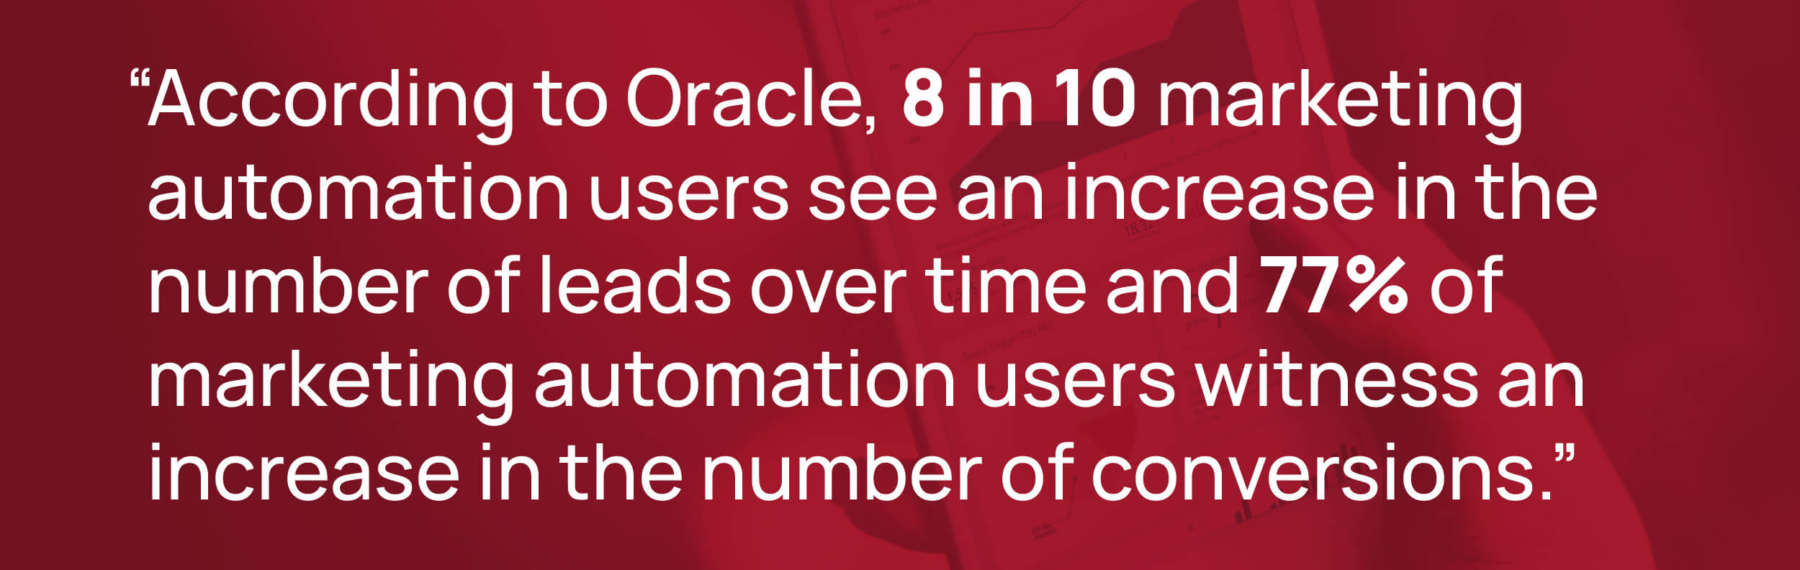 according to oracle, 8 in 10 marketing automation users see an increase in the number of leads over time and 77% of marketing automation users witness an increase in the number of conversions.